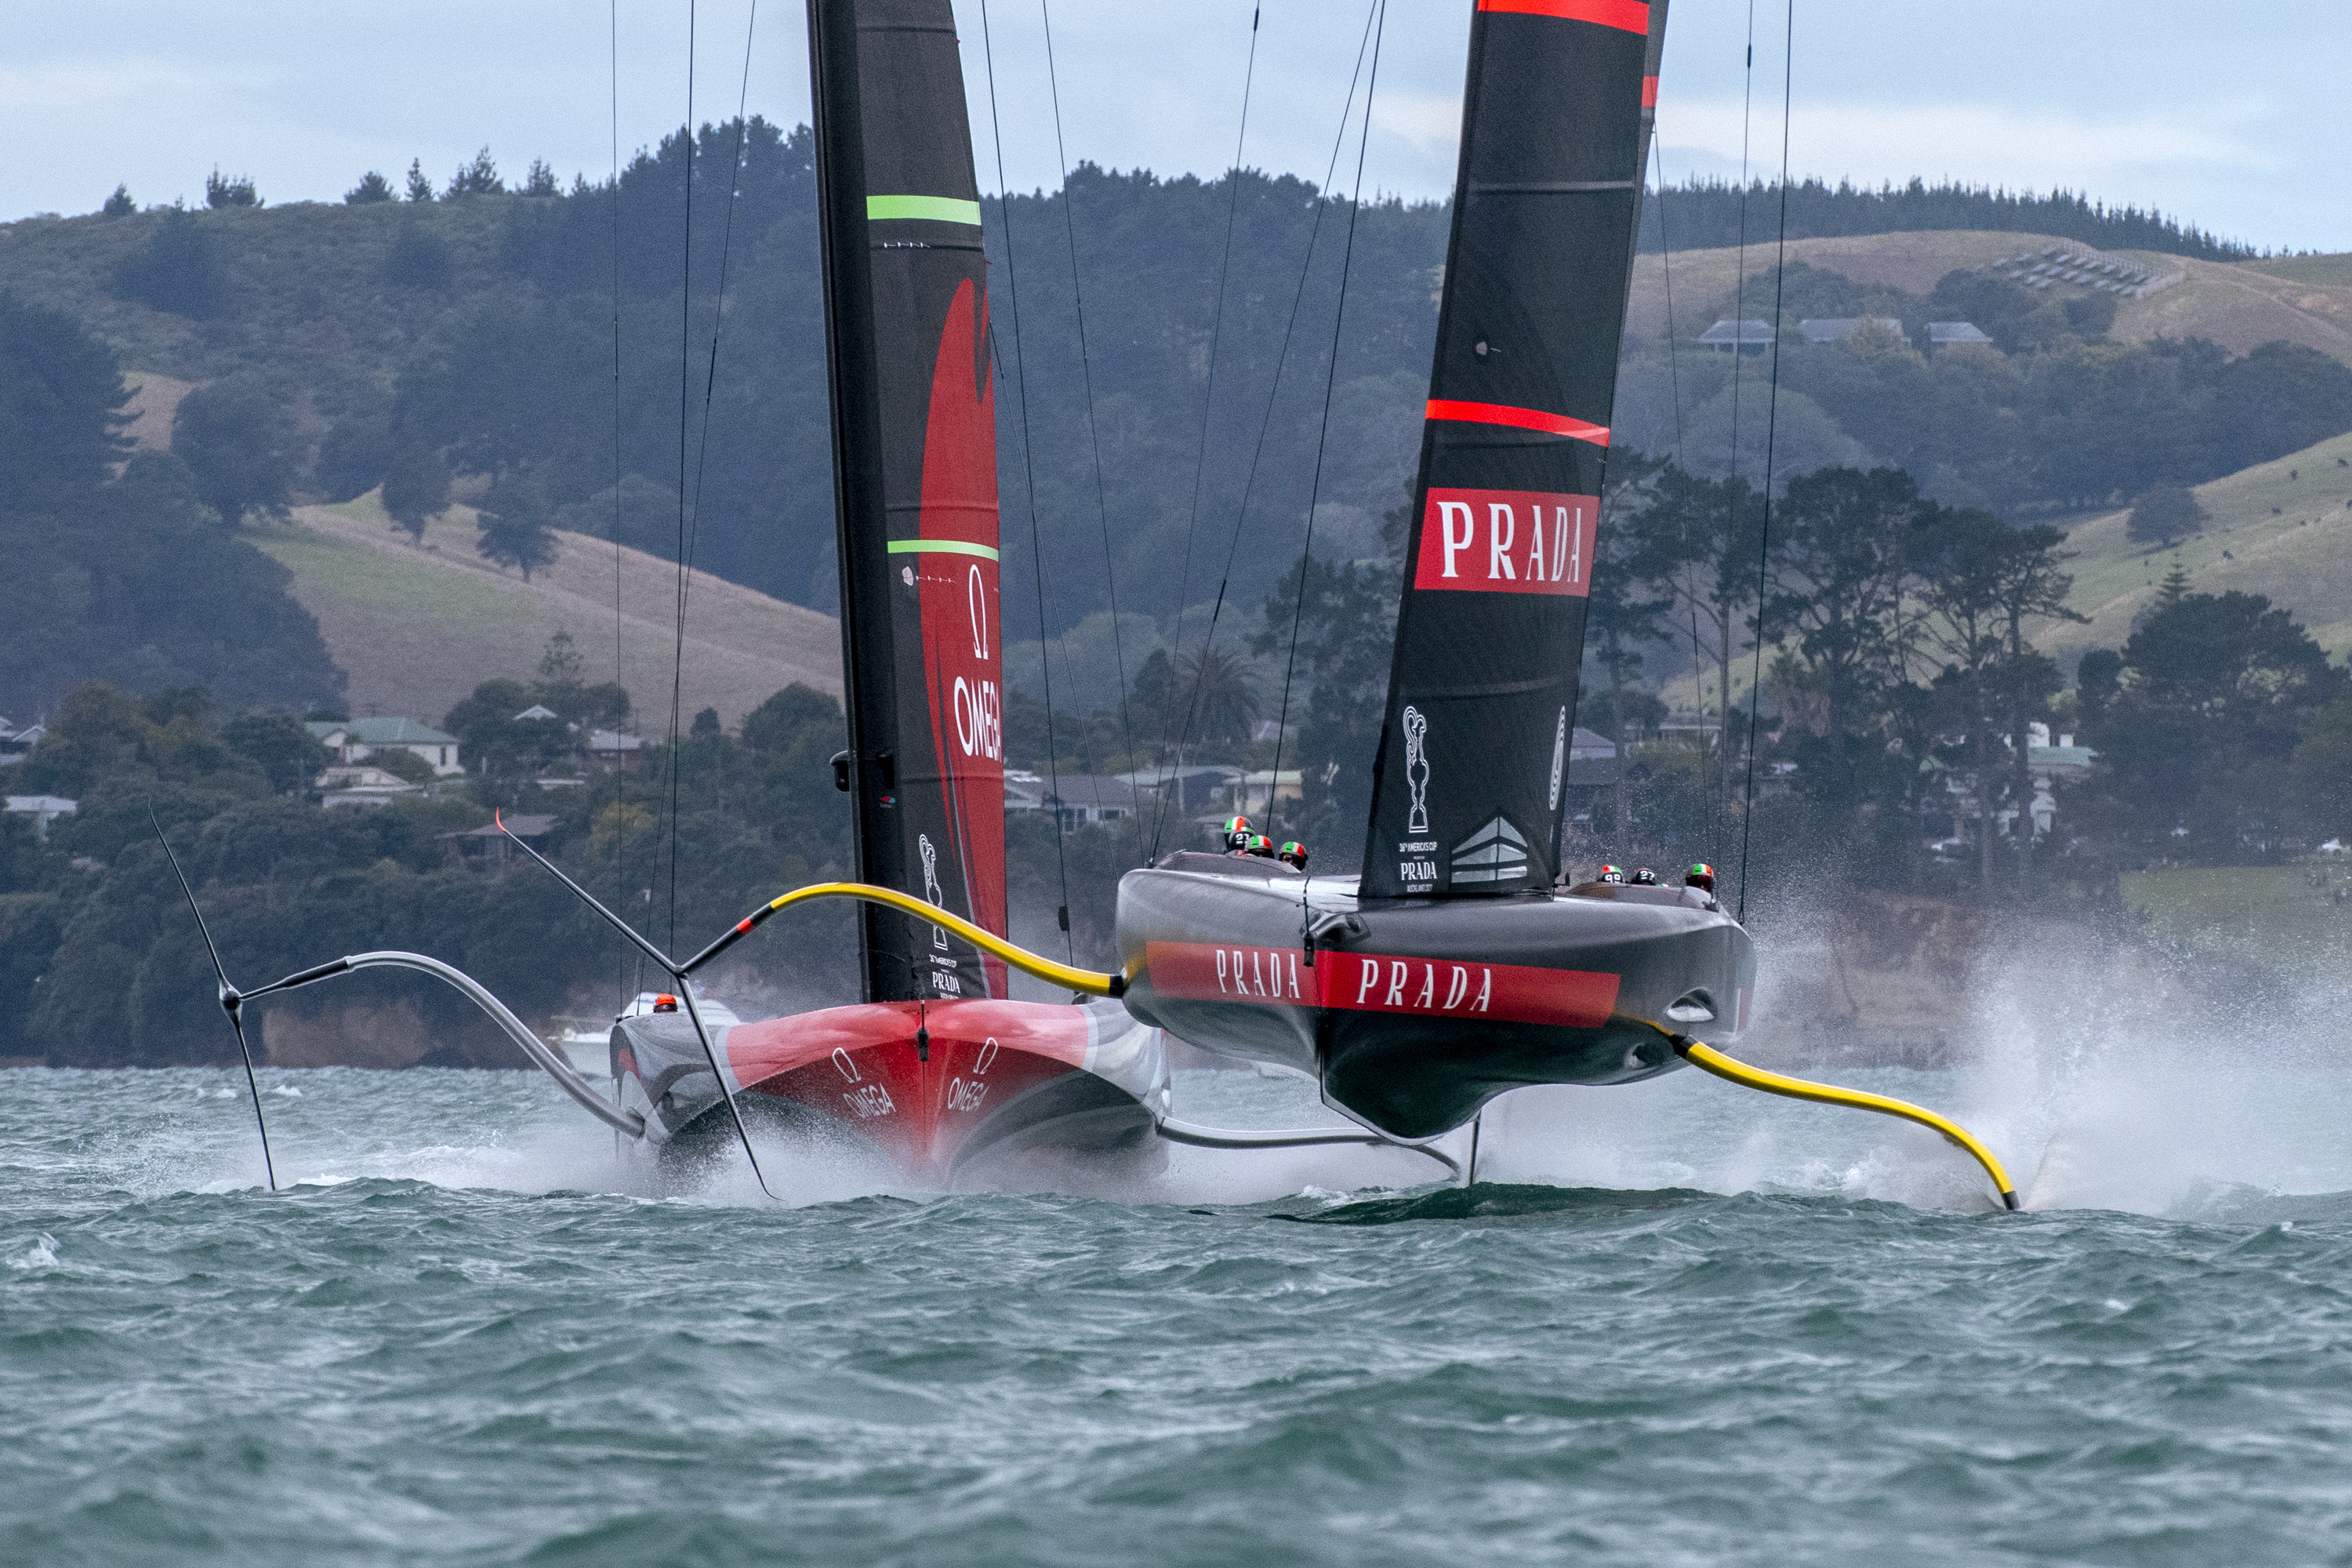 Americas Cup 2021 Day 2 Live stream, TV schedule, how to watch Team New Zealand vs